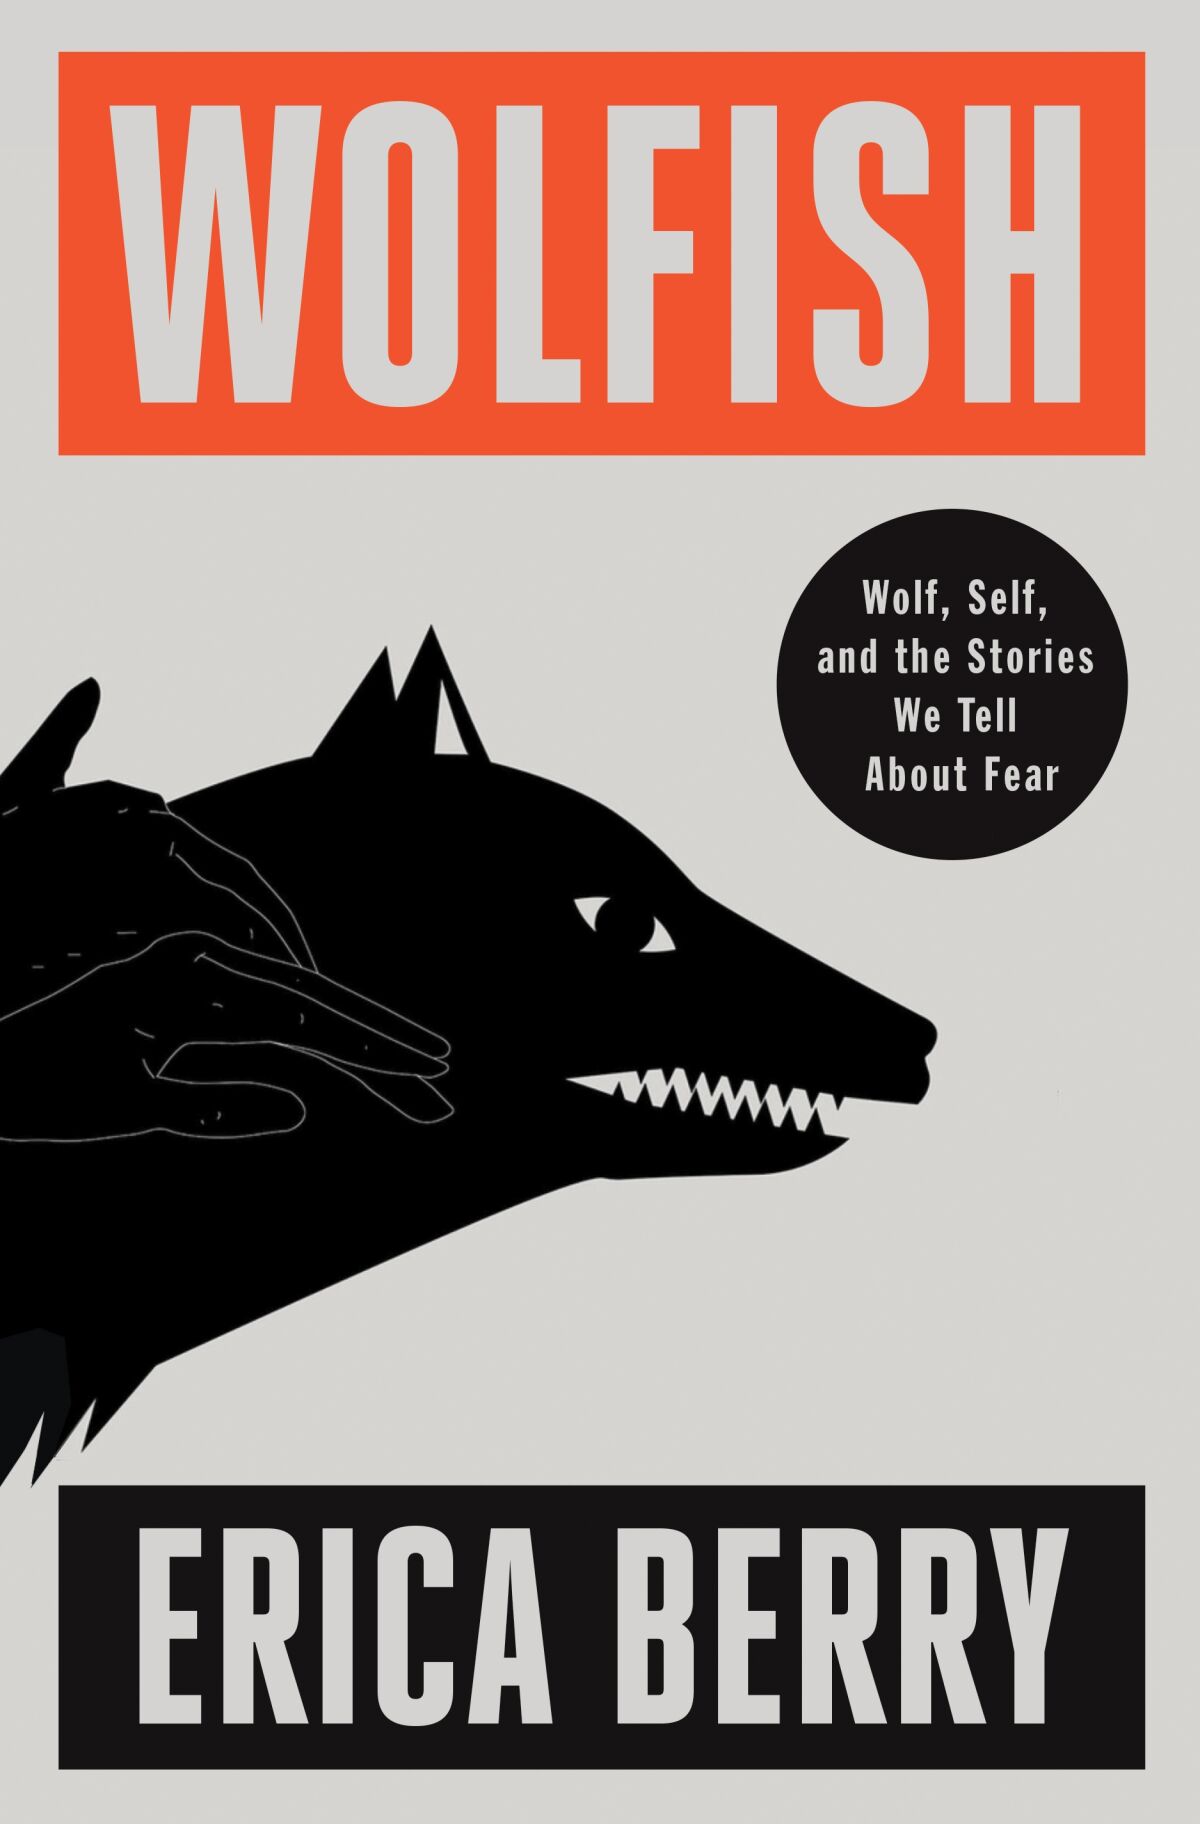 'Wolfish,' by Erica Berry